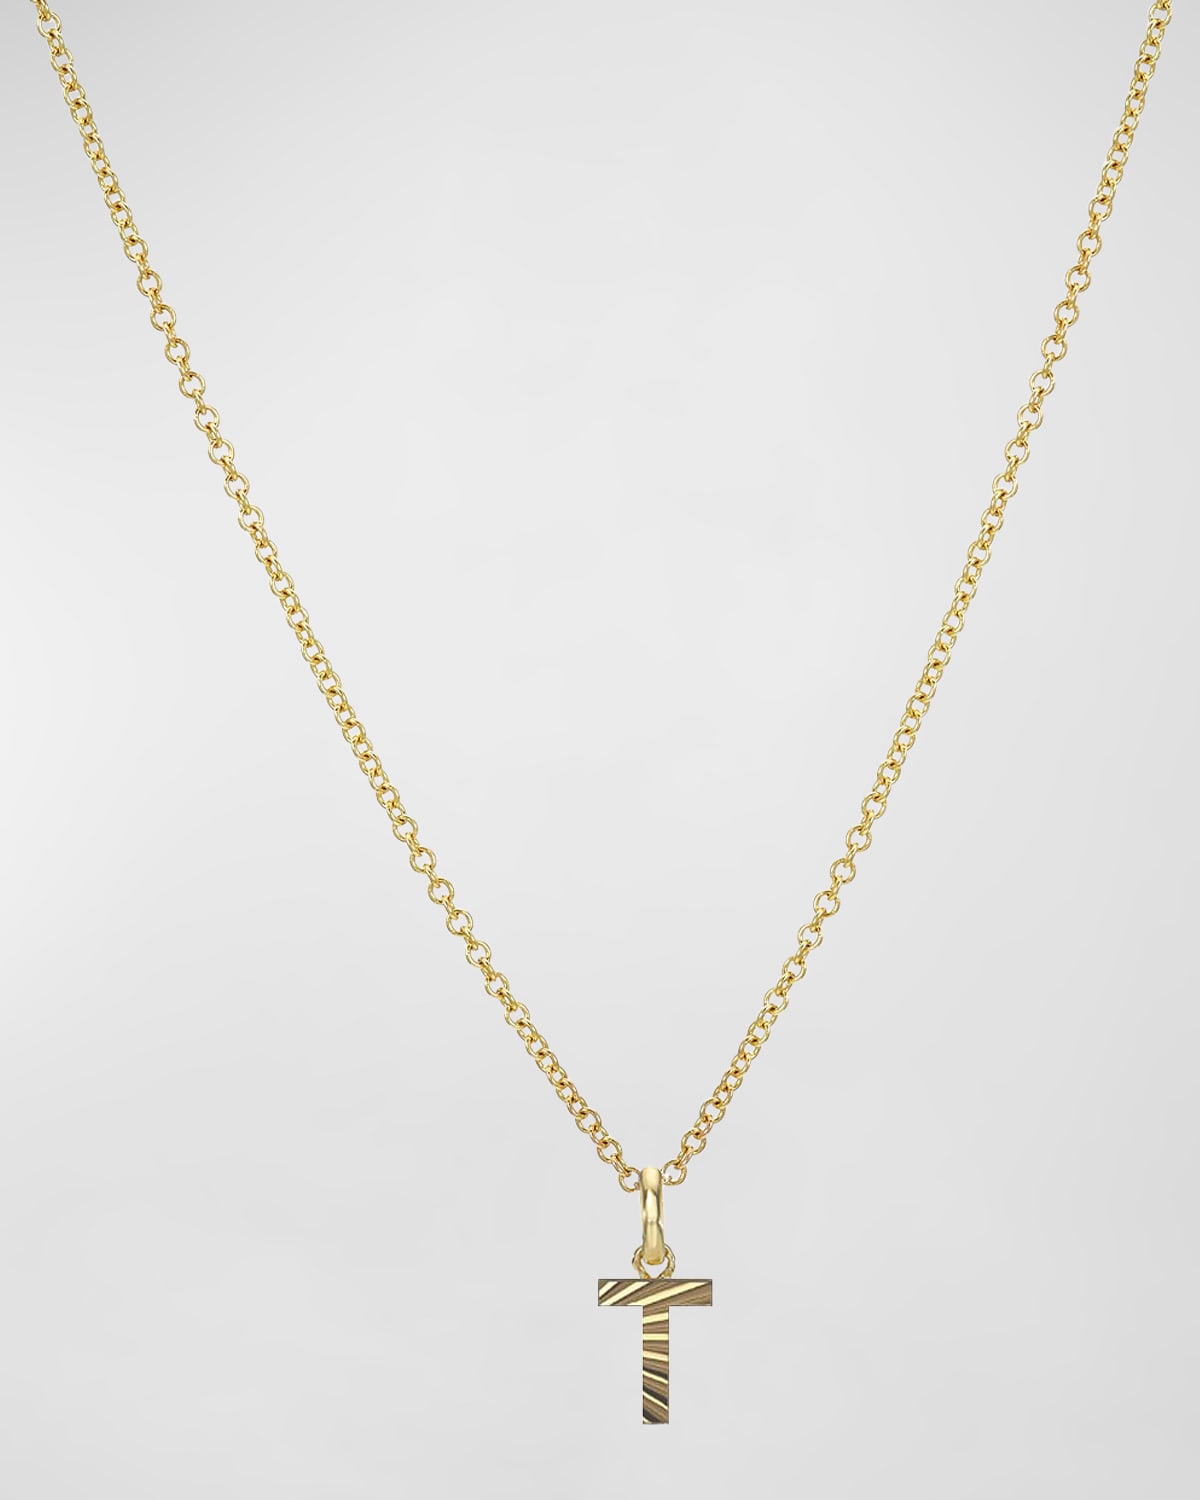 Zoe Lev Jewelry 14k Gold Initial Pendant Necklace In T